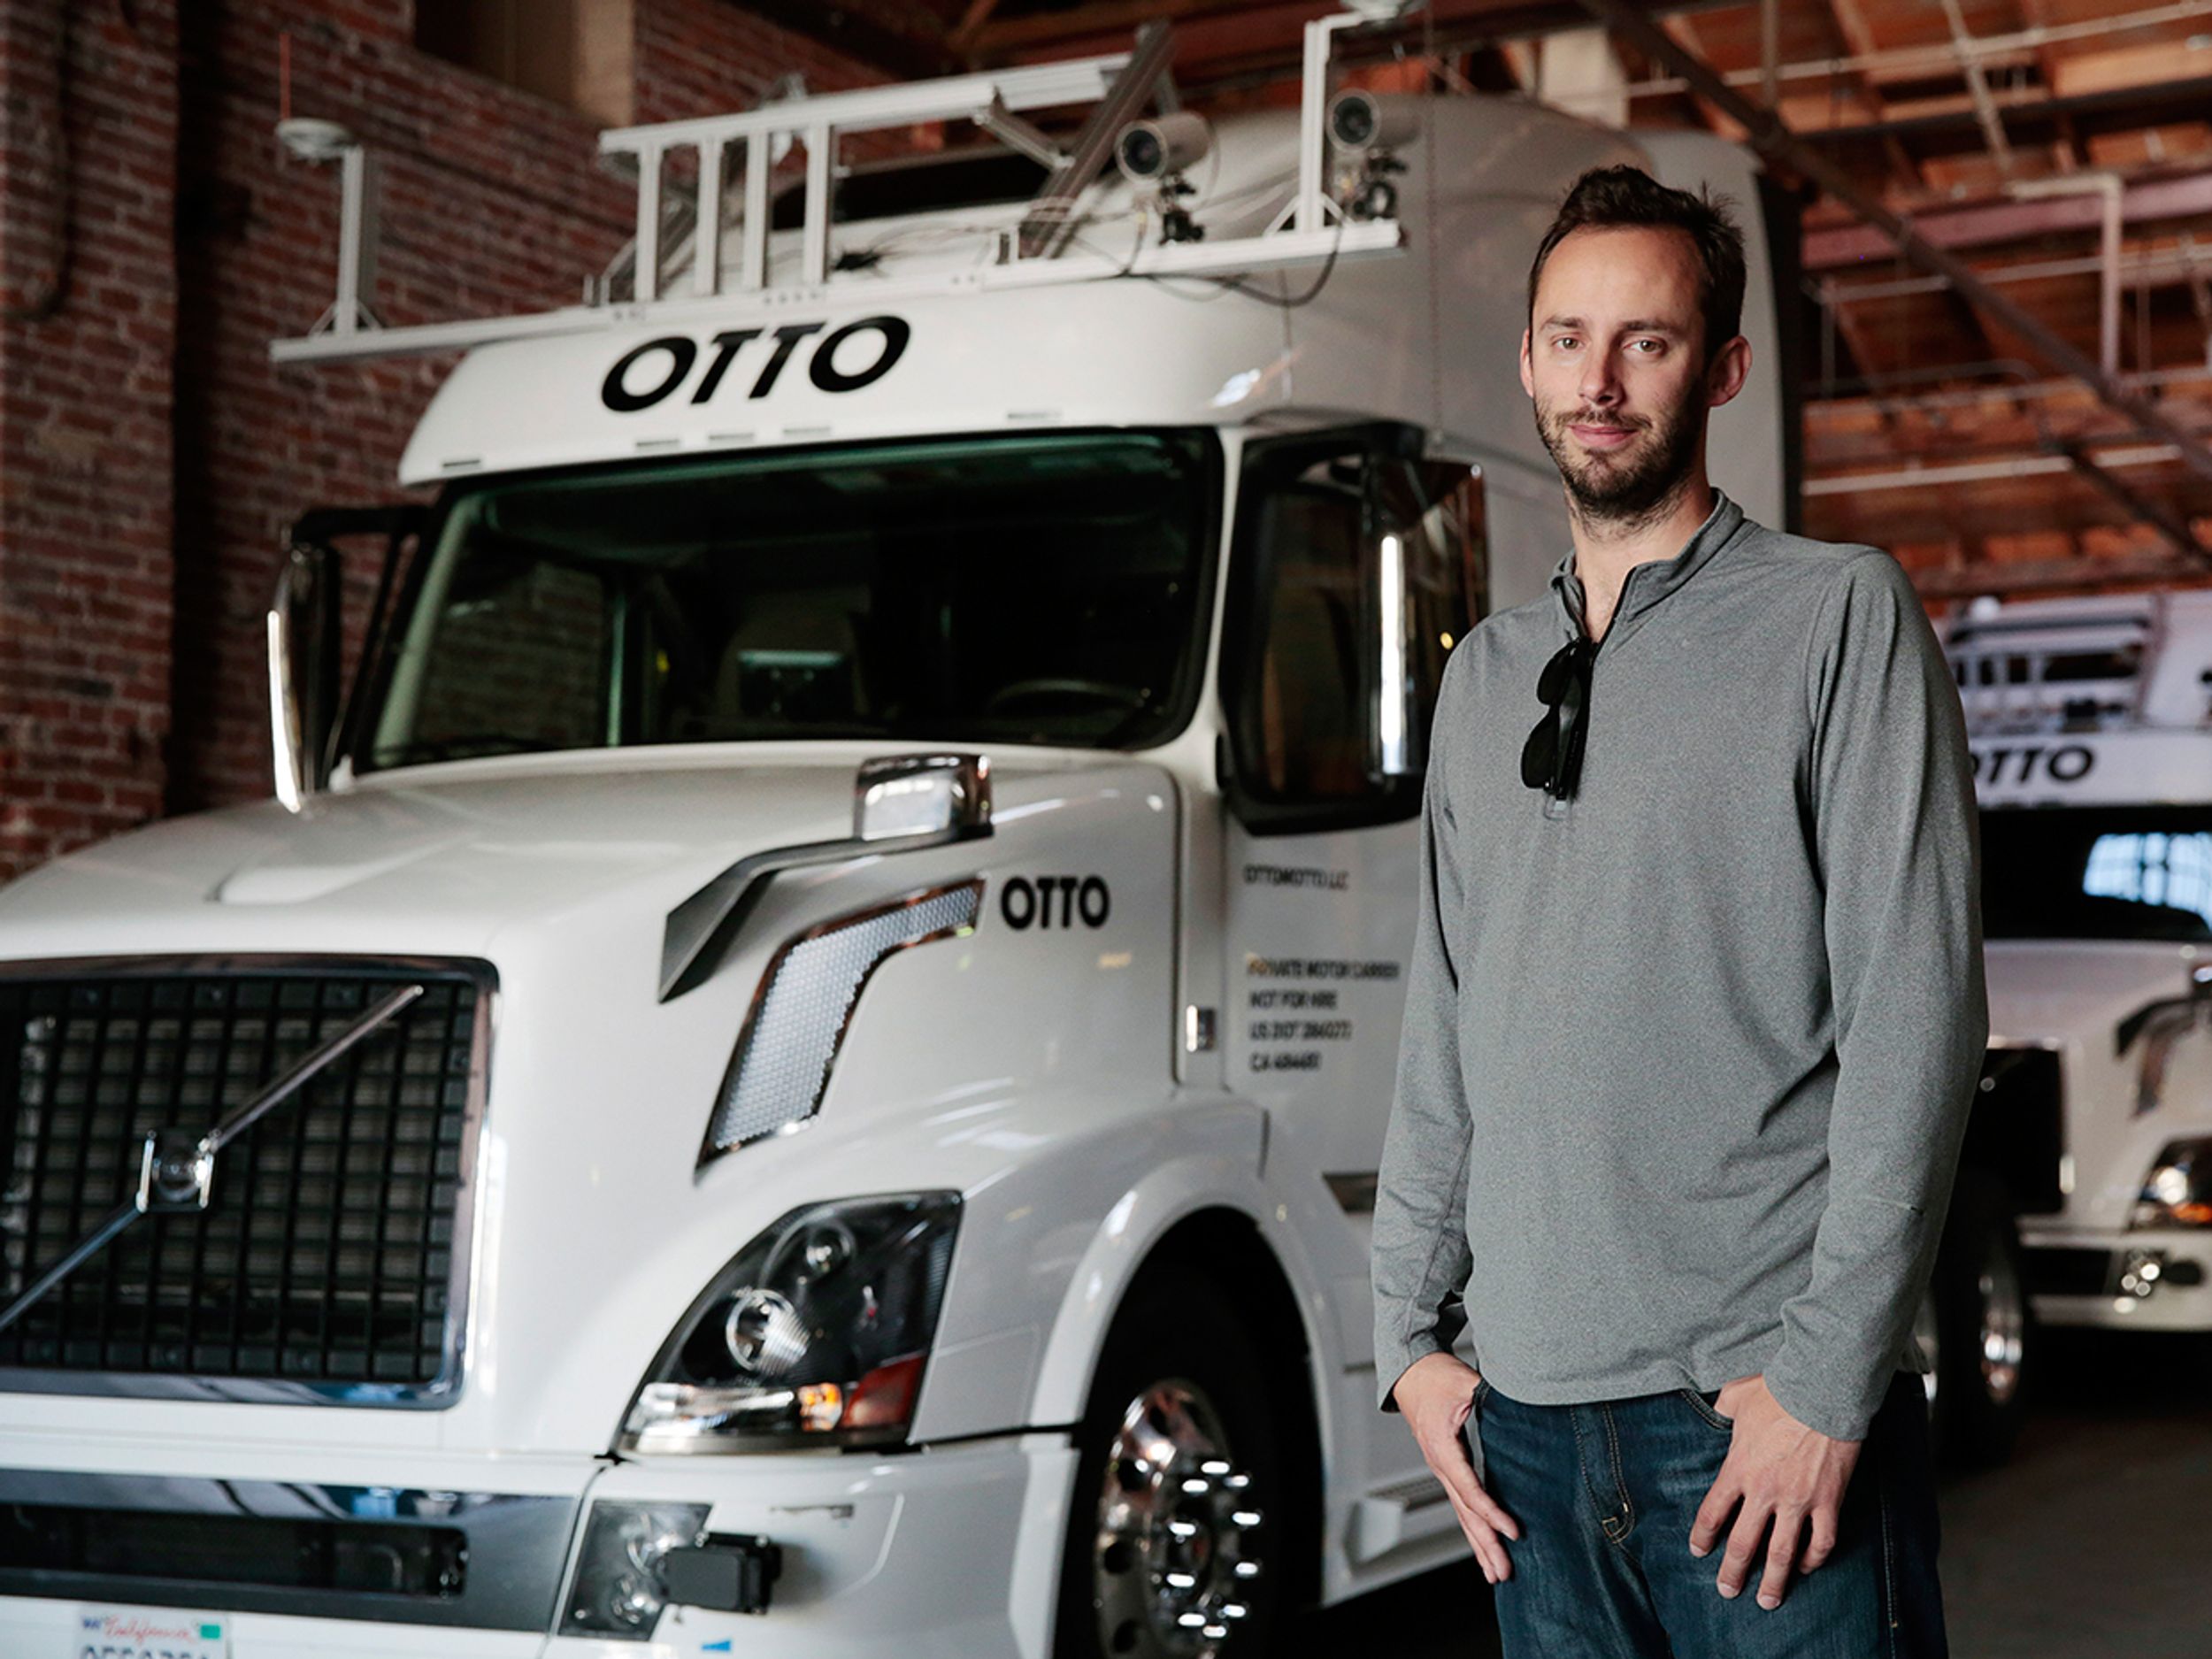 Anthony Levandowski, a former Google engineer and co-founder of the self-driving truck company Otto, which was bought by Uber, in San Francisco, May 16, 2016, in front of an Otto autonomous truck.